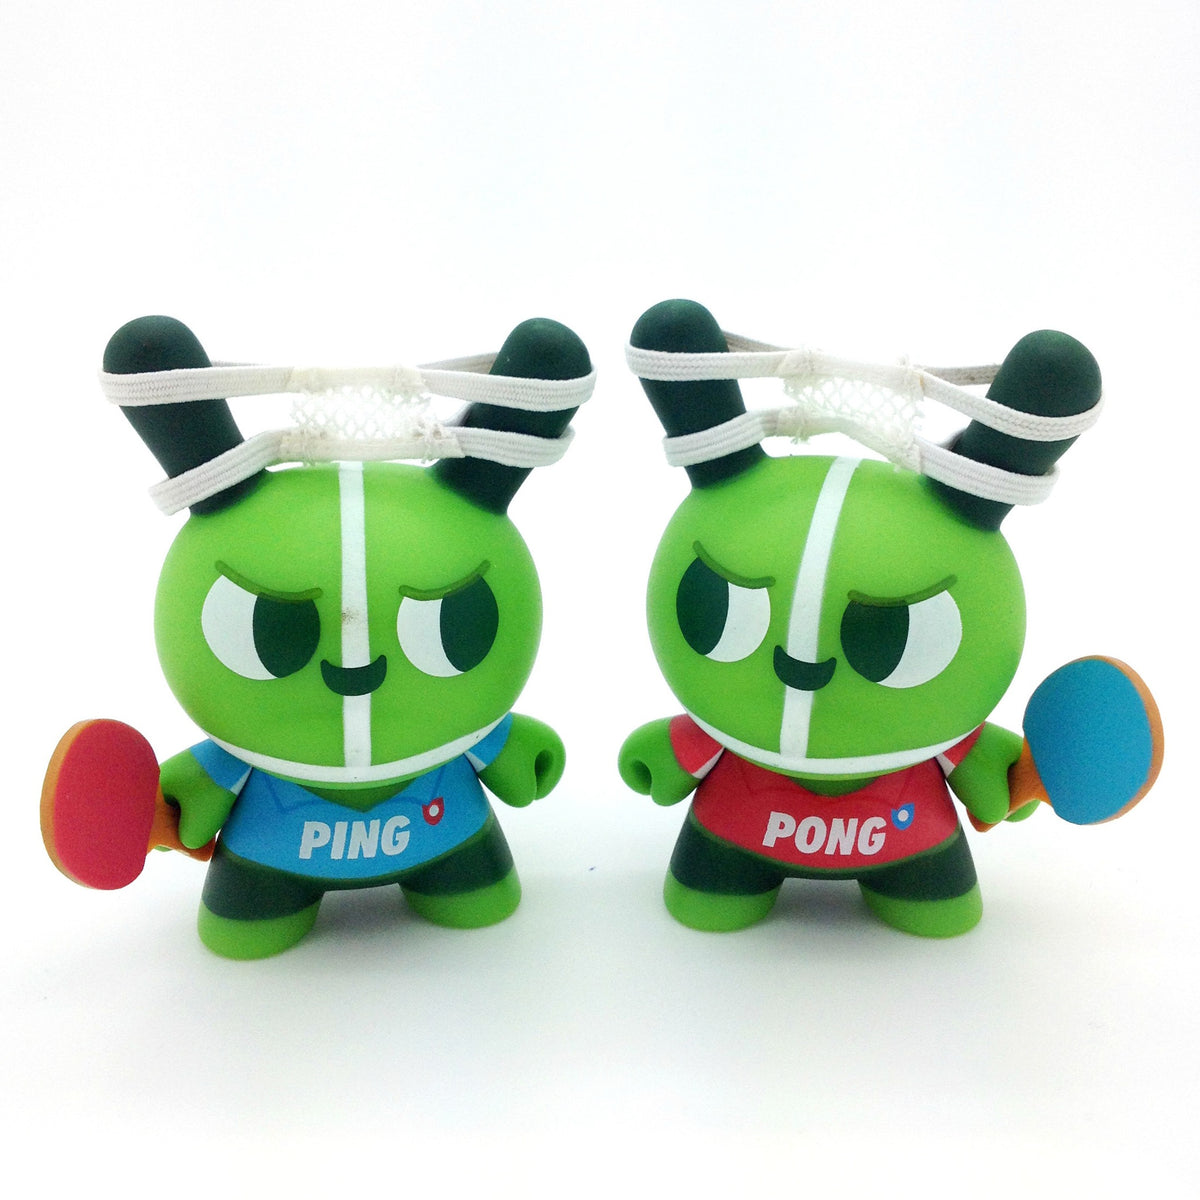 Dunny 2012 Series - Ping and Pong (Set of 2) - Mindzai
 - 1